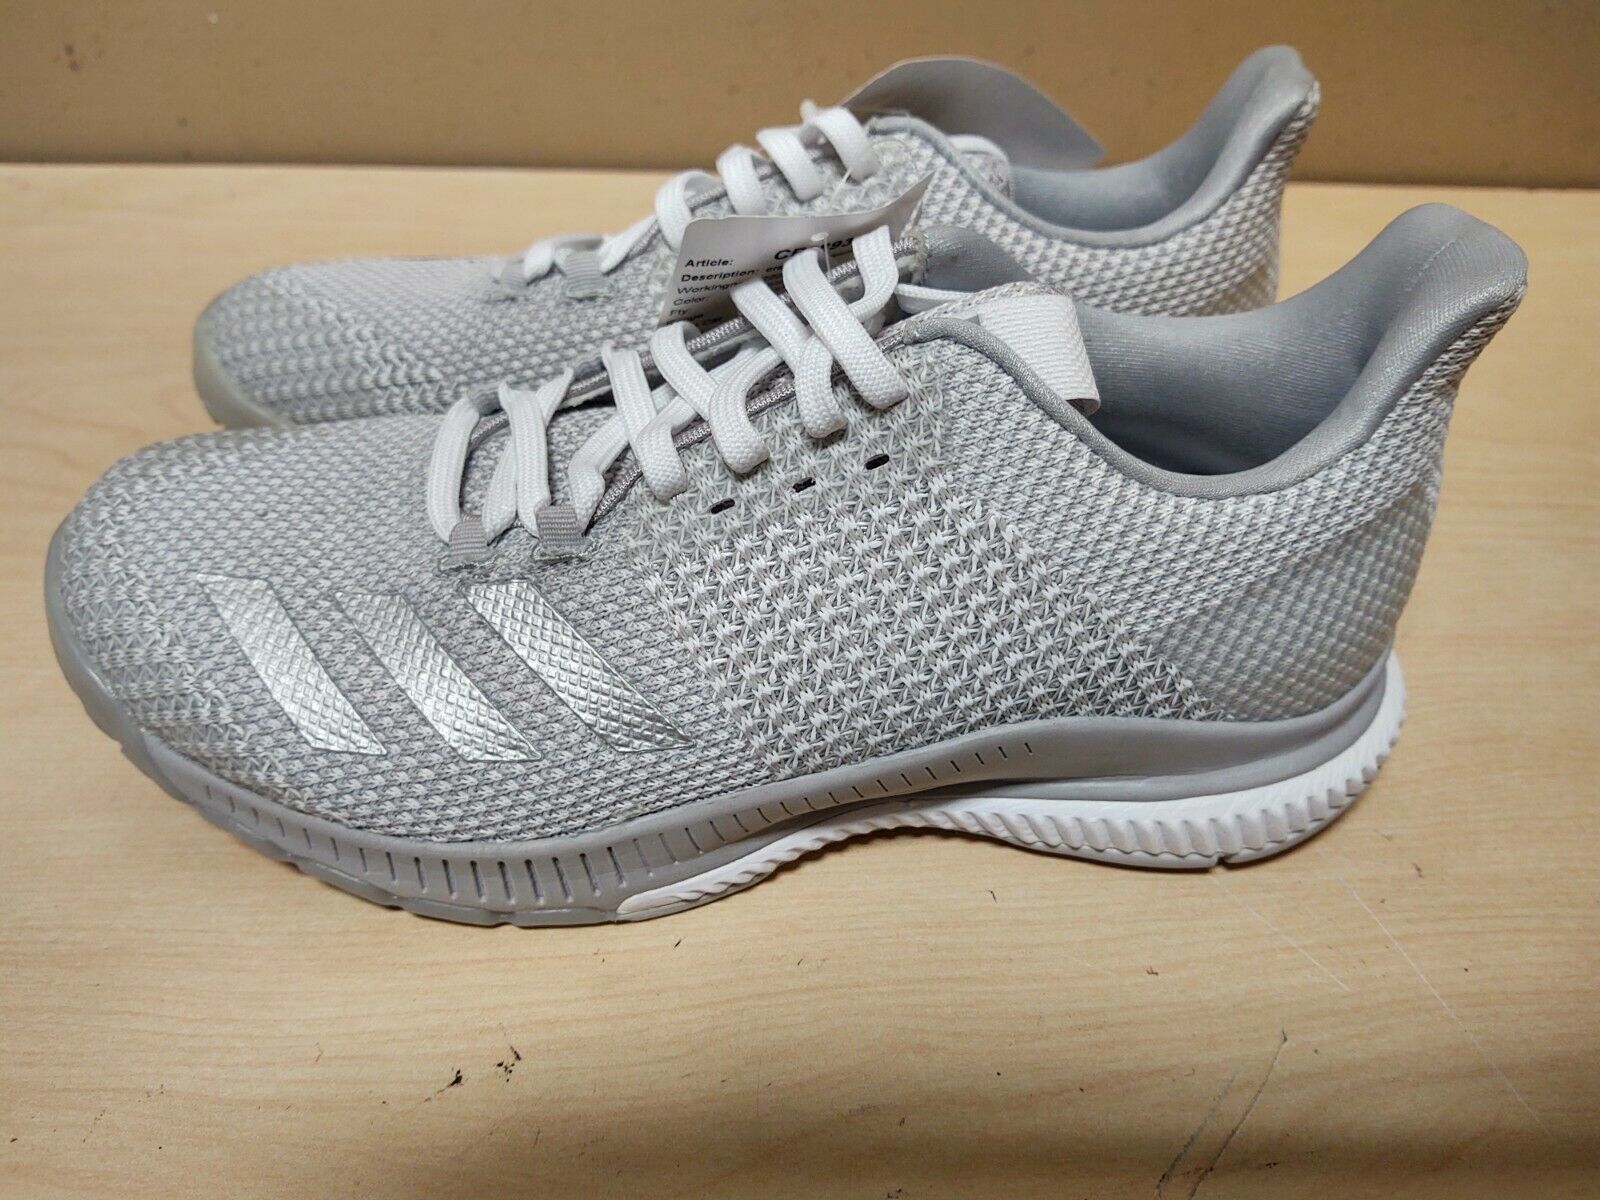 Adidas Crazy Flight Bounce Ladies Volleyball Shoes Size 7 CP8893 White ...